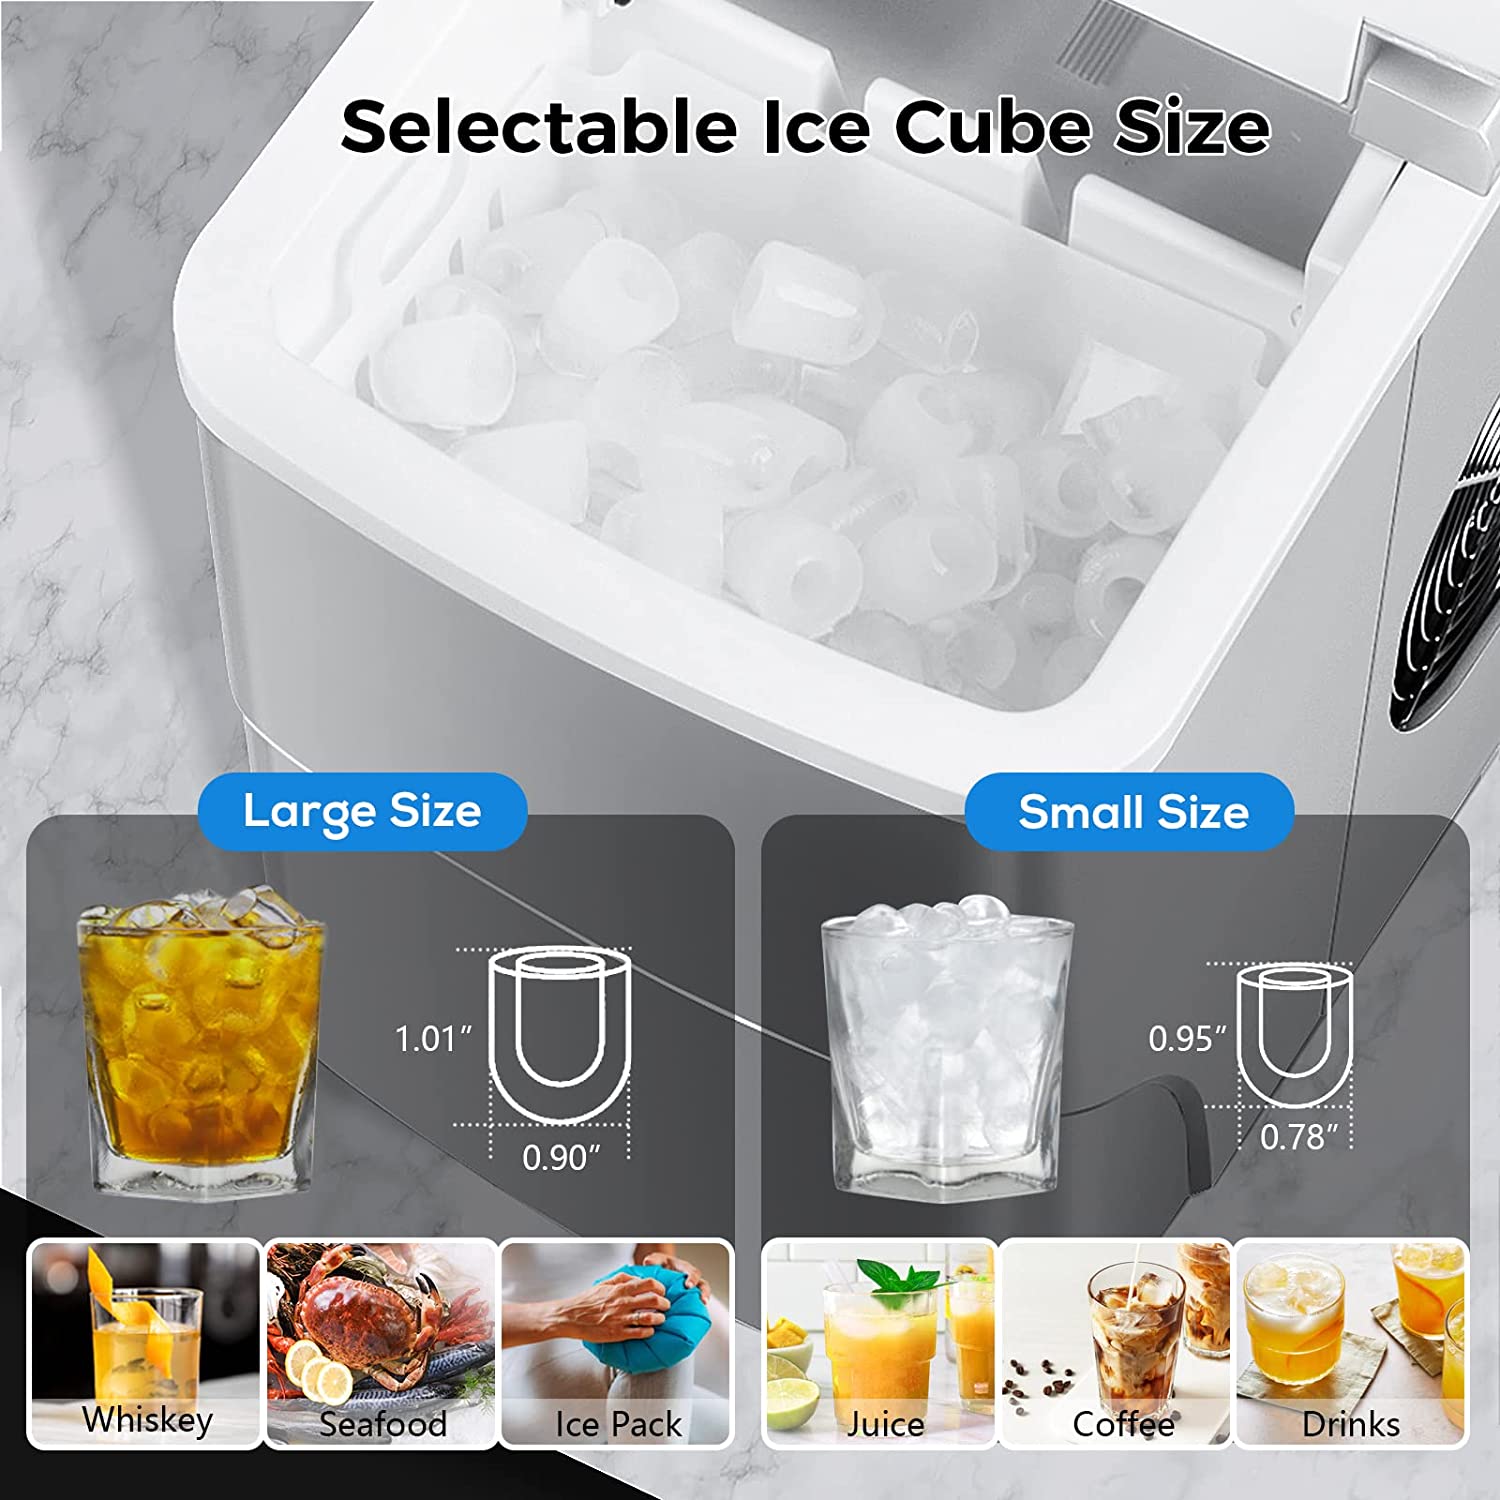 AGLUCKY Ice Makers Countertop  Ice maker, Ice maker machine, Maker